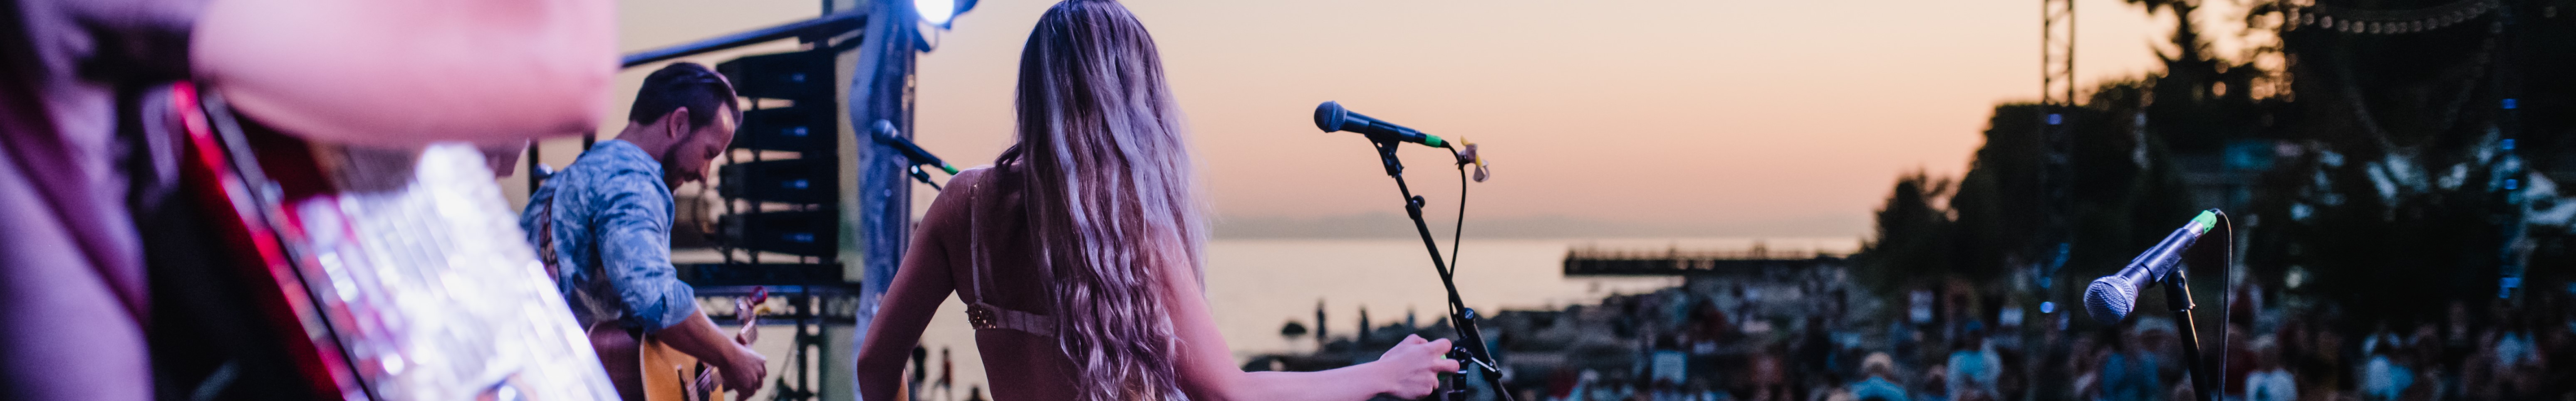 Silhouetted figure holding a microphone on a music stage at sunset. Female singer and guitarist performing in the background.